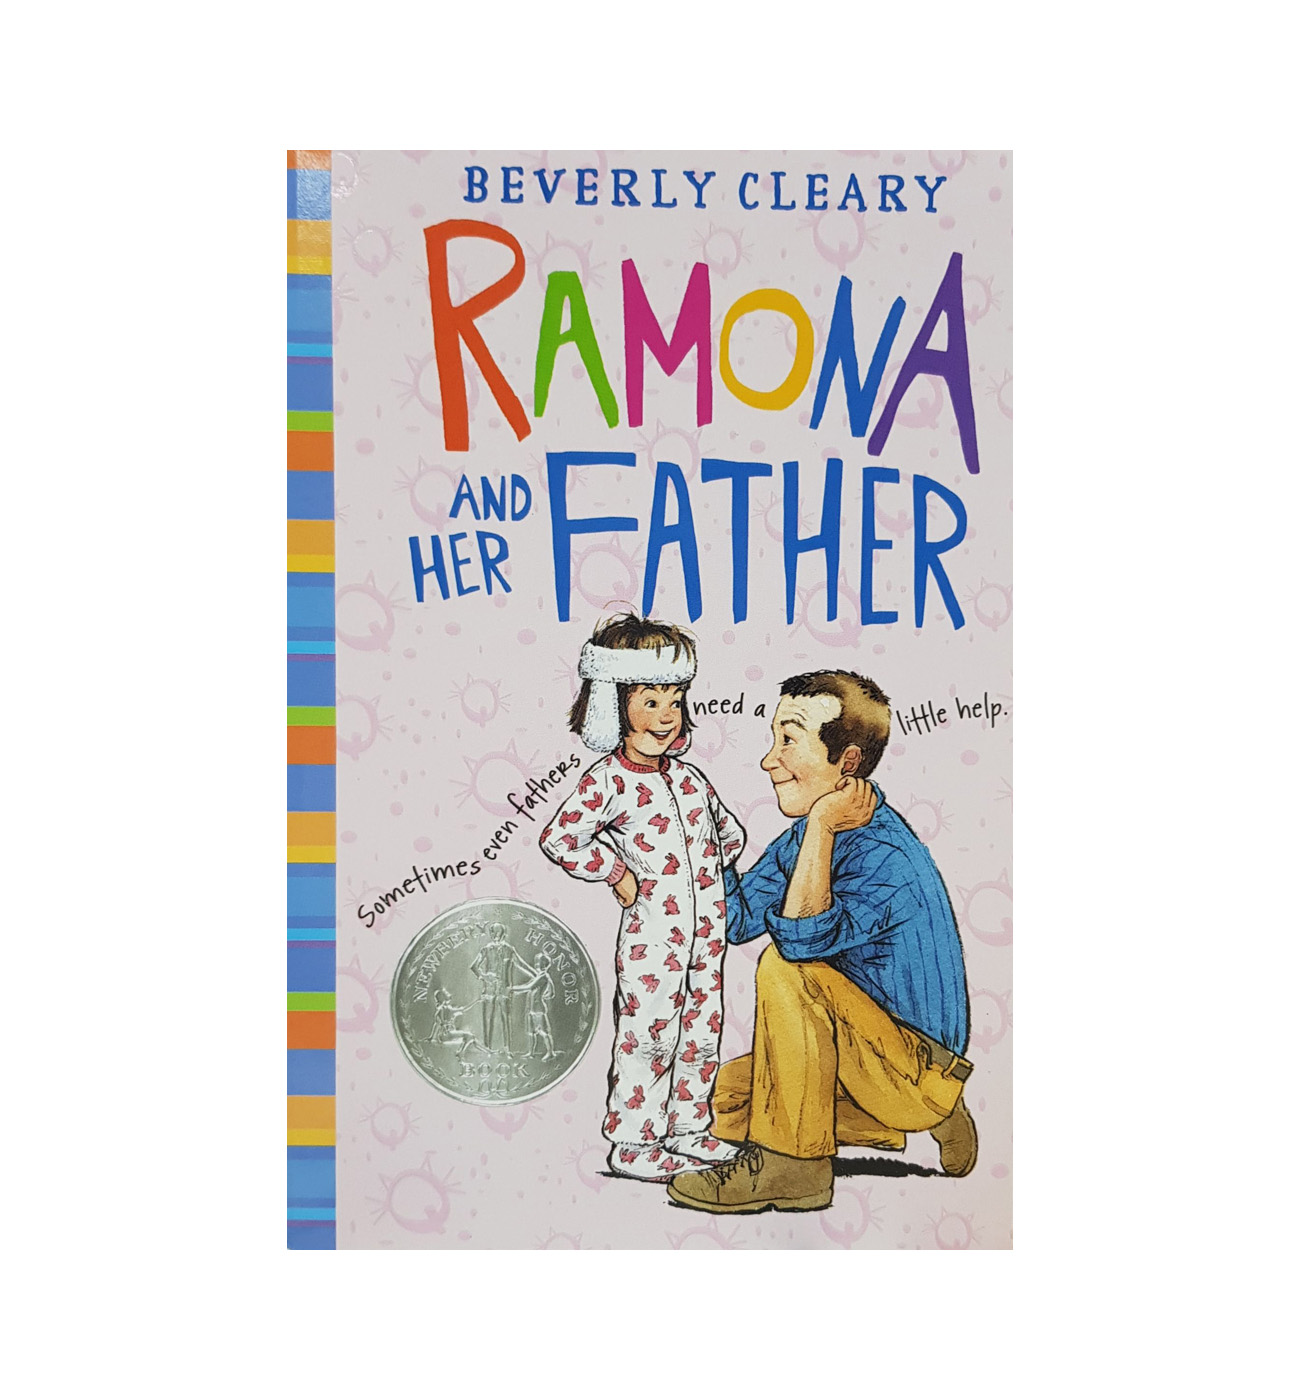 [ĺ:B()] Beverly Cleary : Ramona and Her Father 